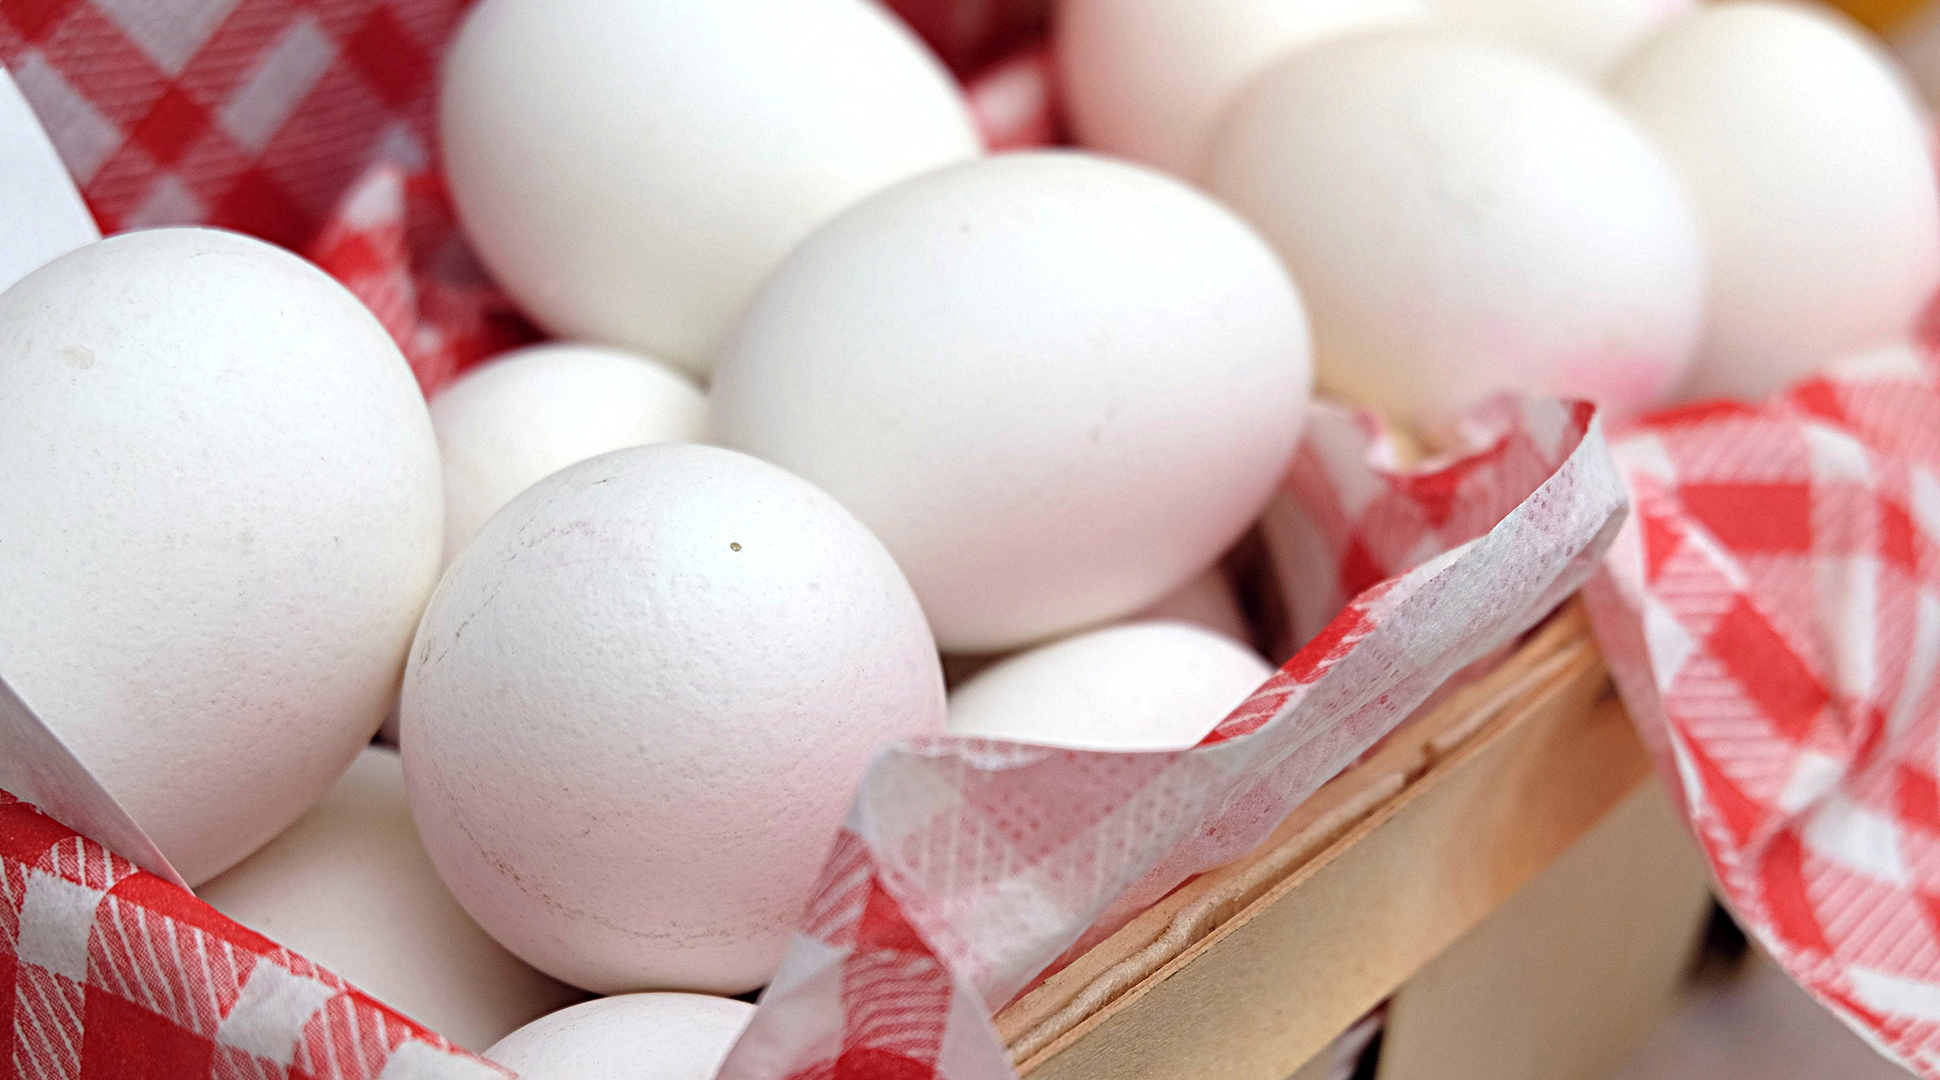 If high-priced eggs are a budget strain